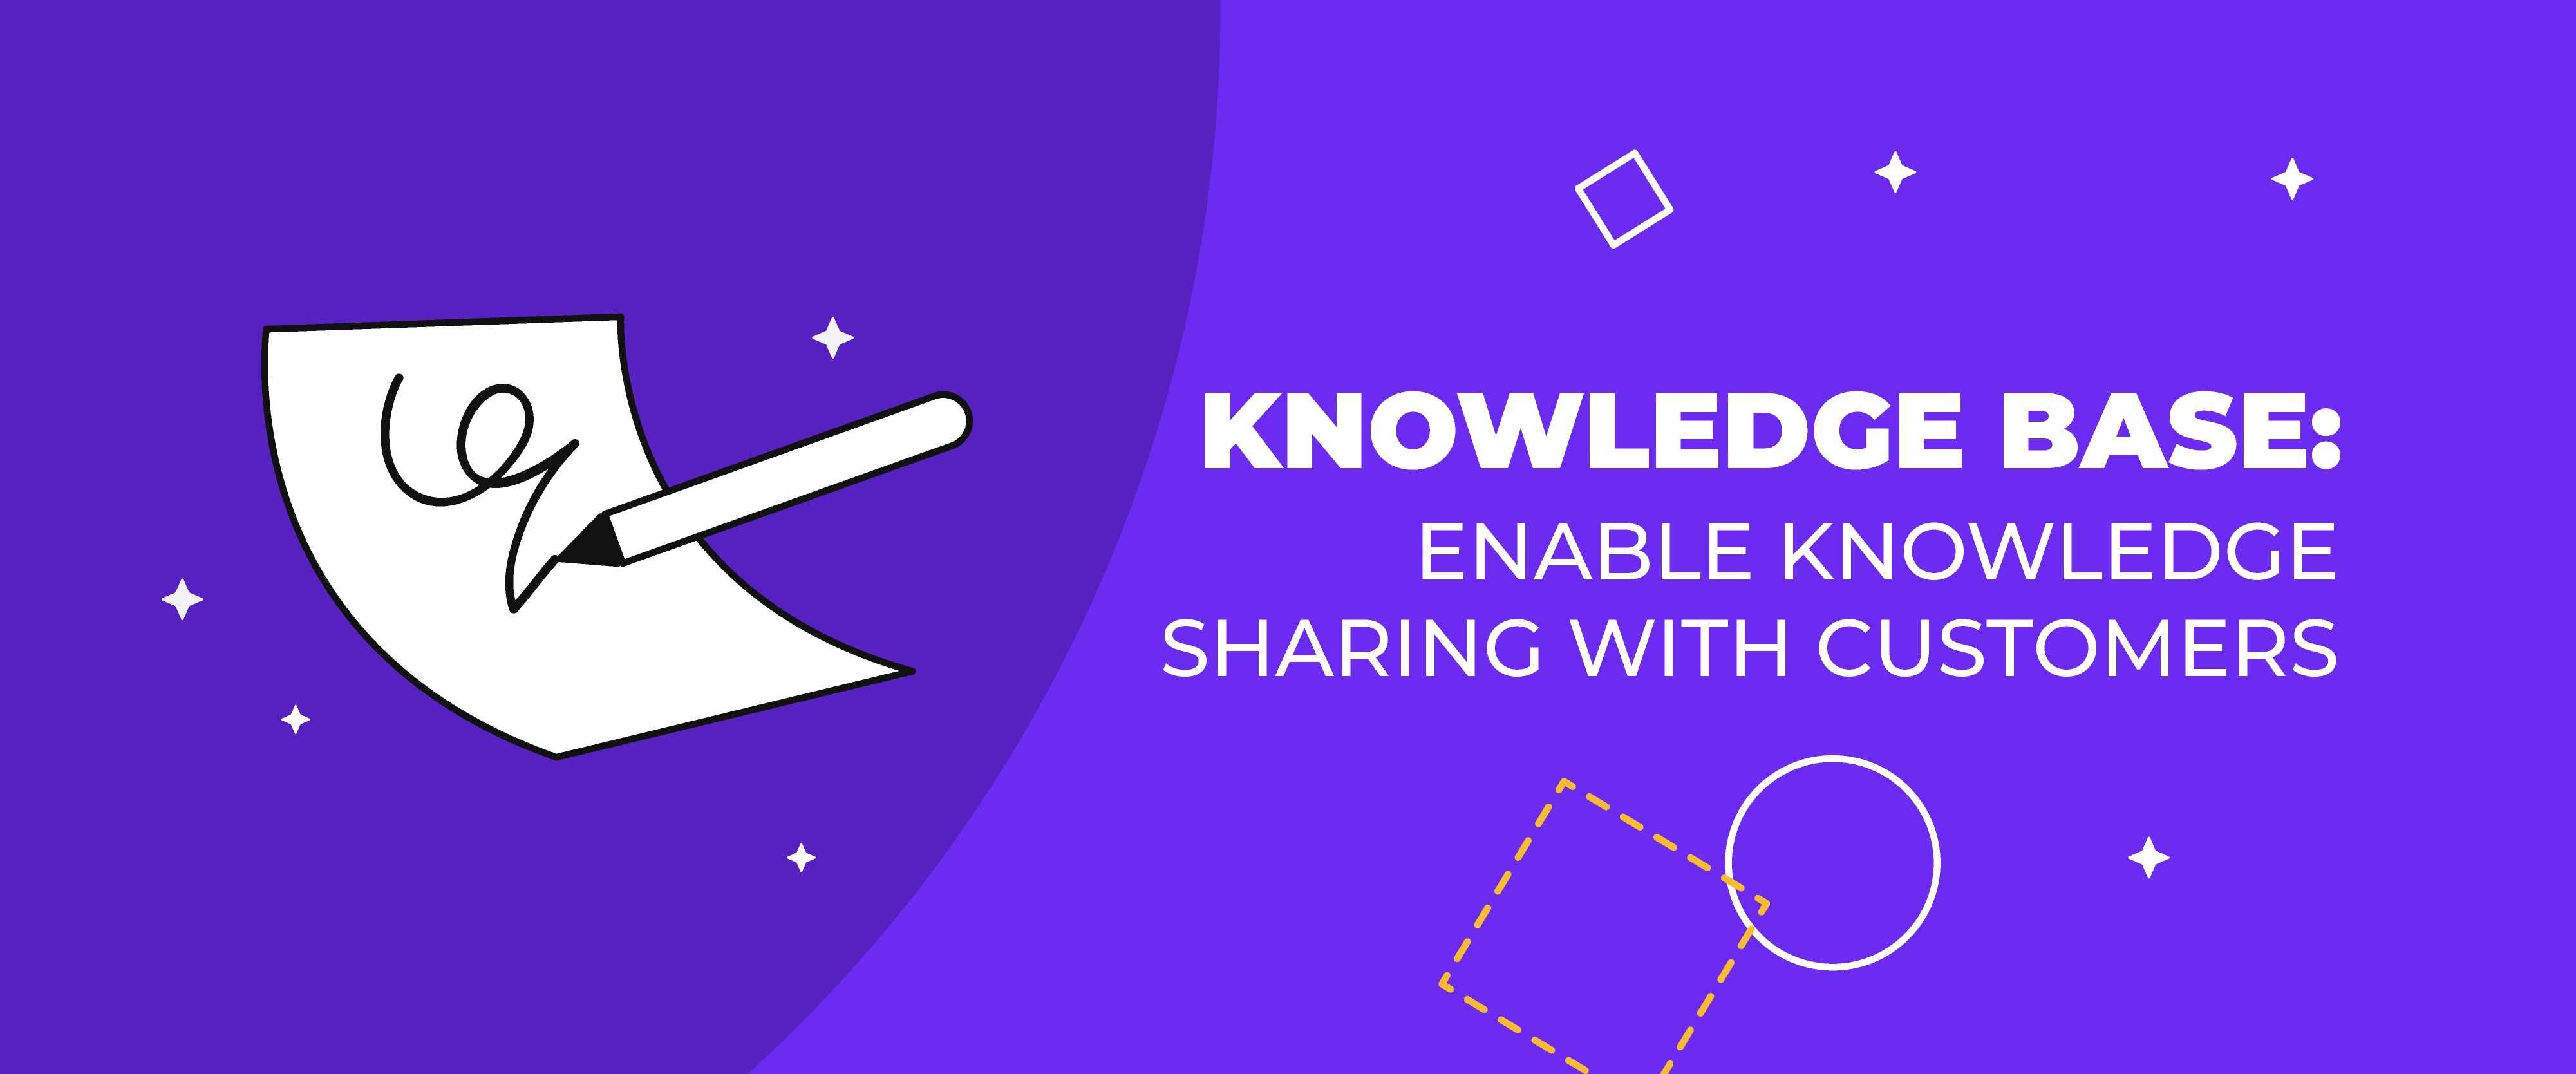 Knowledge Base: Enable Knowledge Sharing With Customers